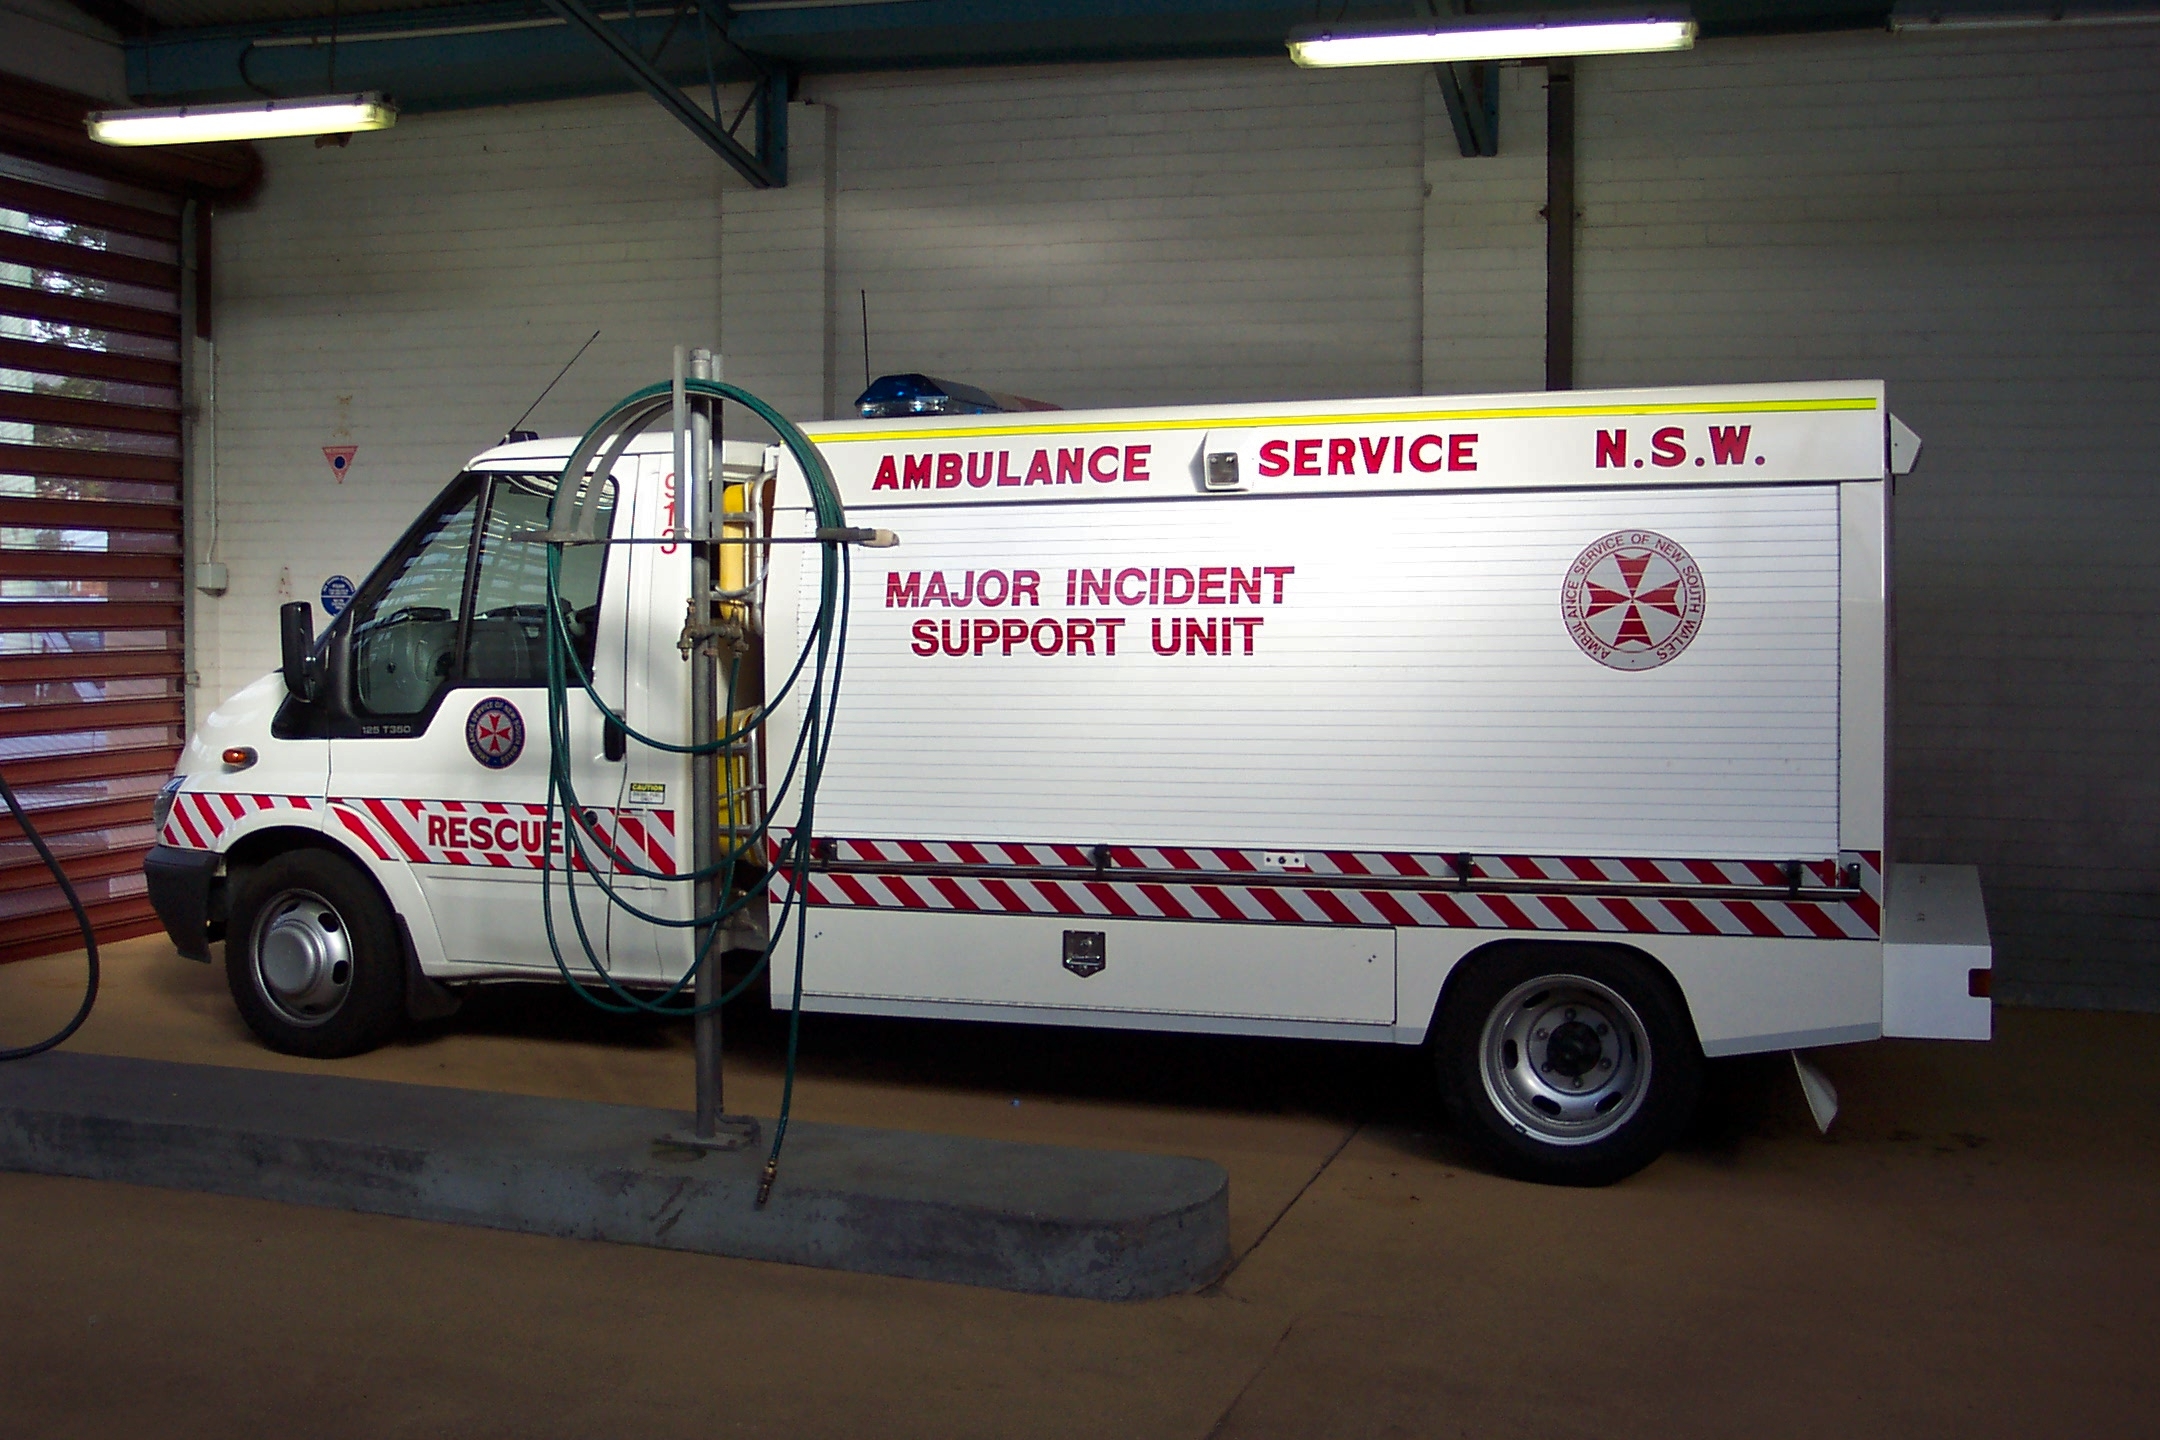 a ambulance truck parked in an enclosed area